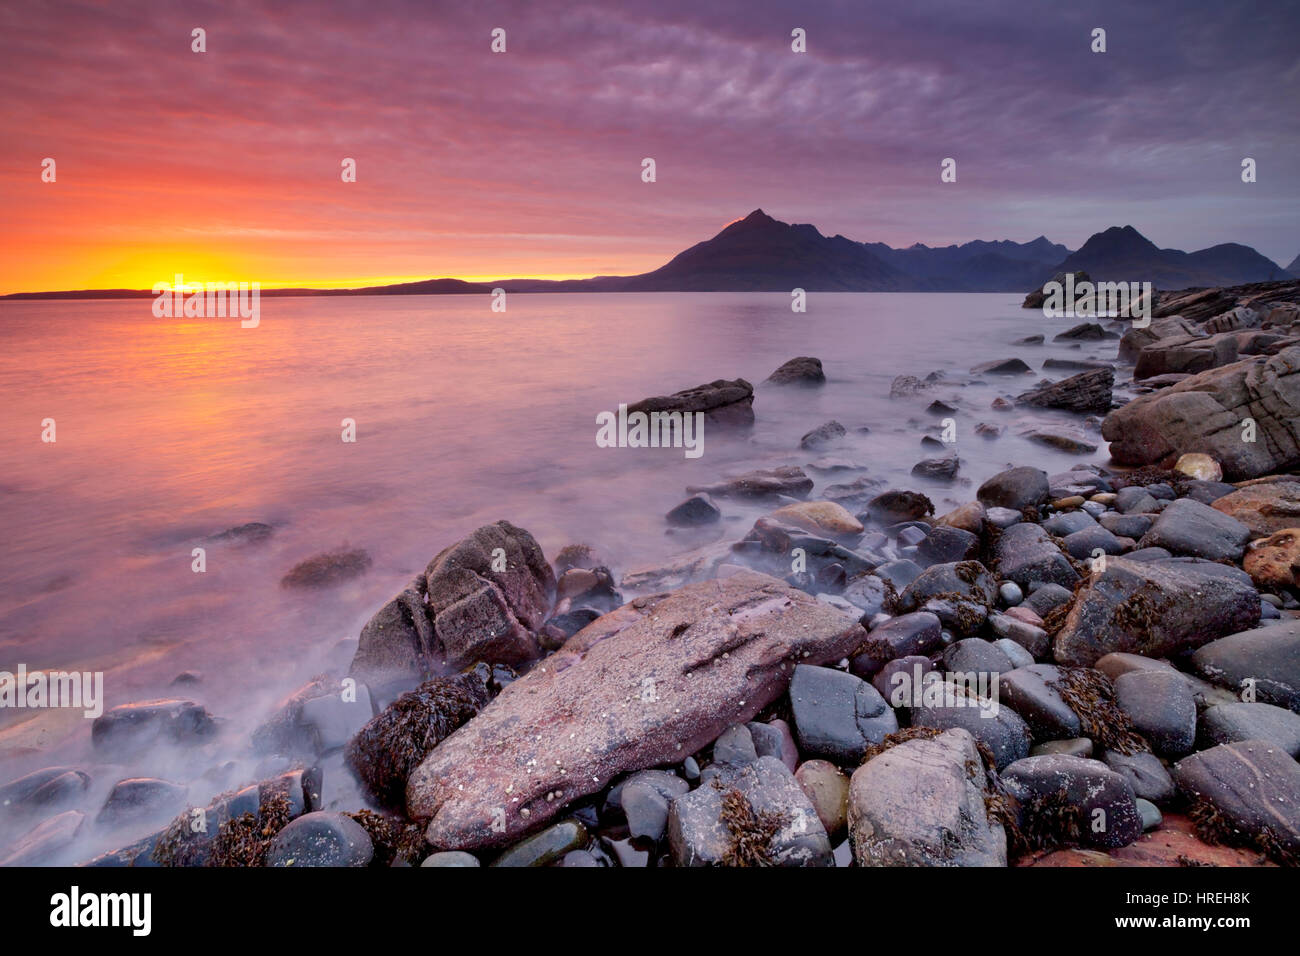 The beach of Elgol on the Isle of Skye, Scotland with The Cuillins in the background. Photographed at sunset. Stock Photo